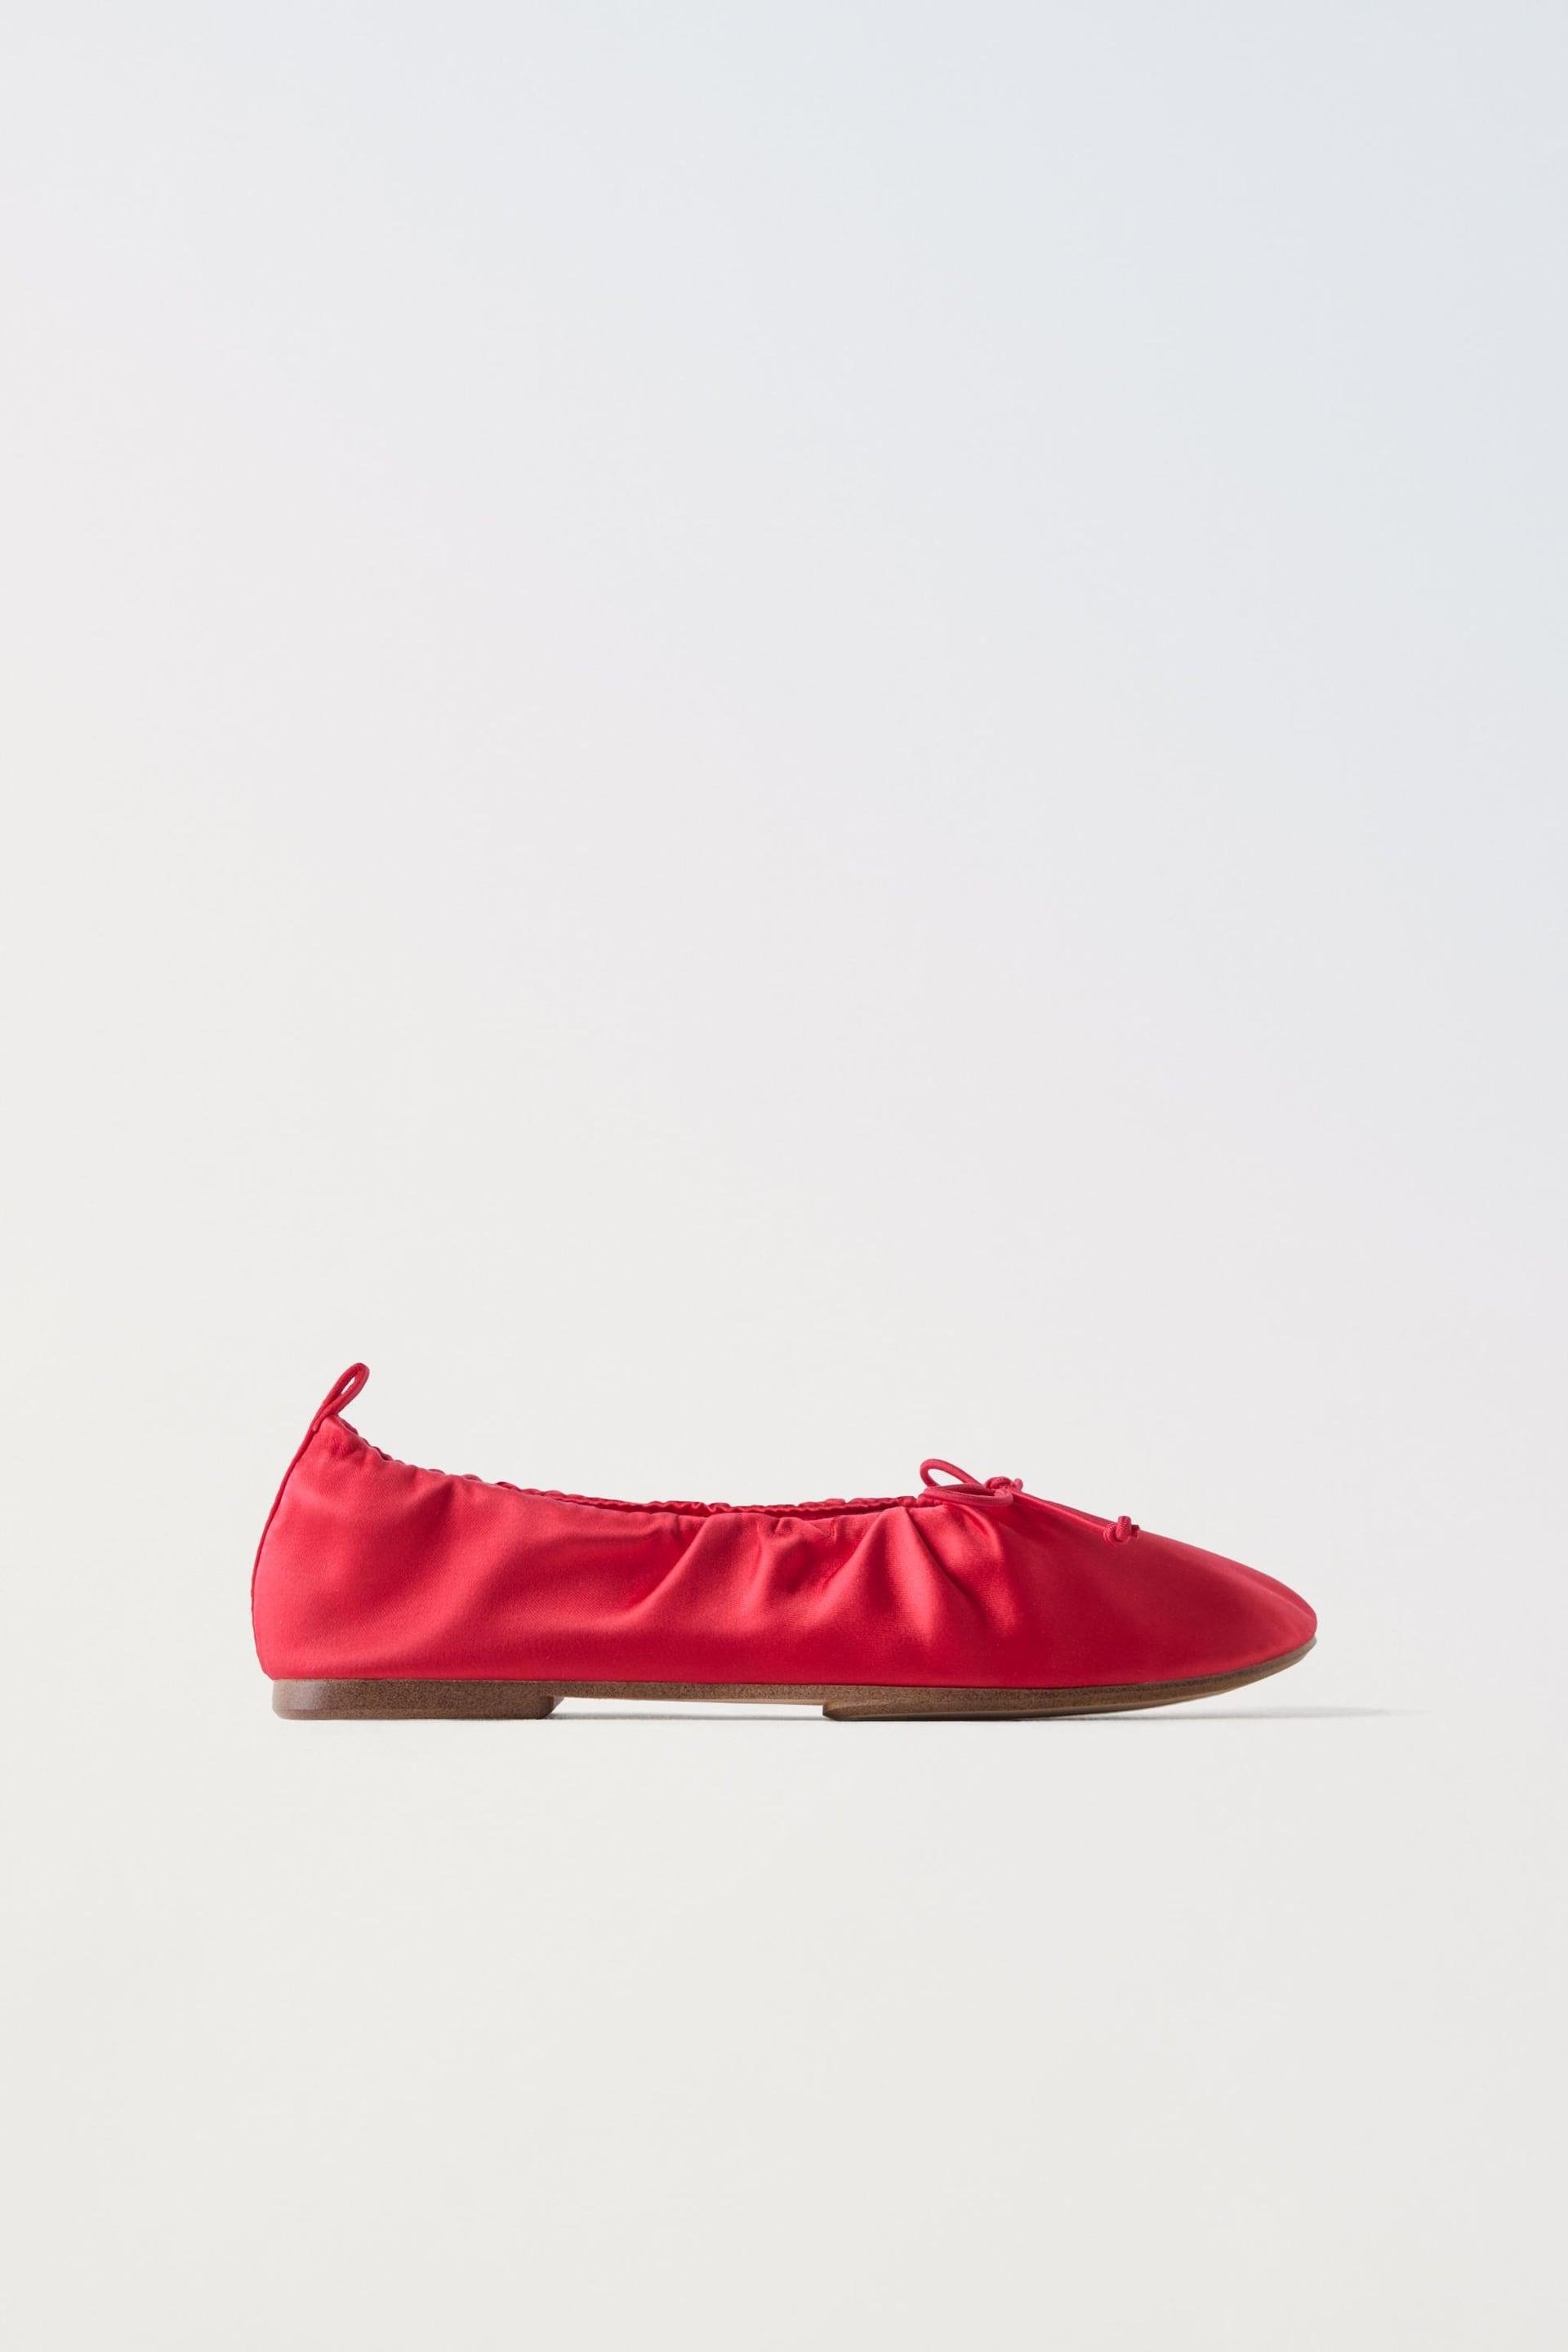 RUCHED BOW TRIM BALLET FLATS by ZARA